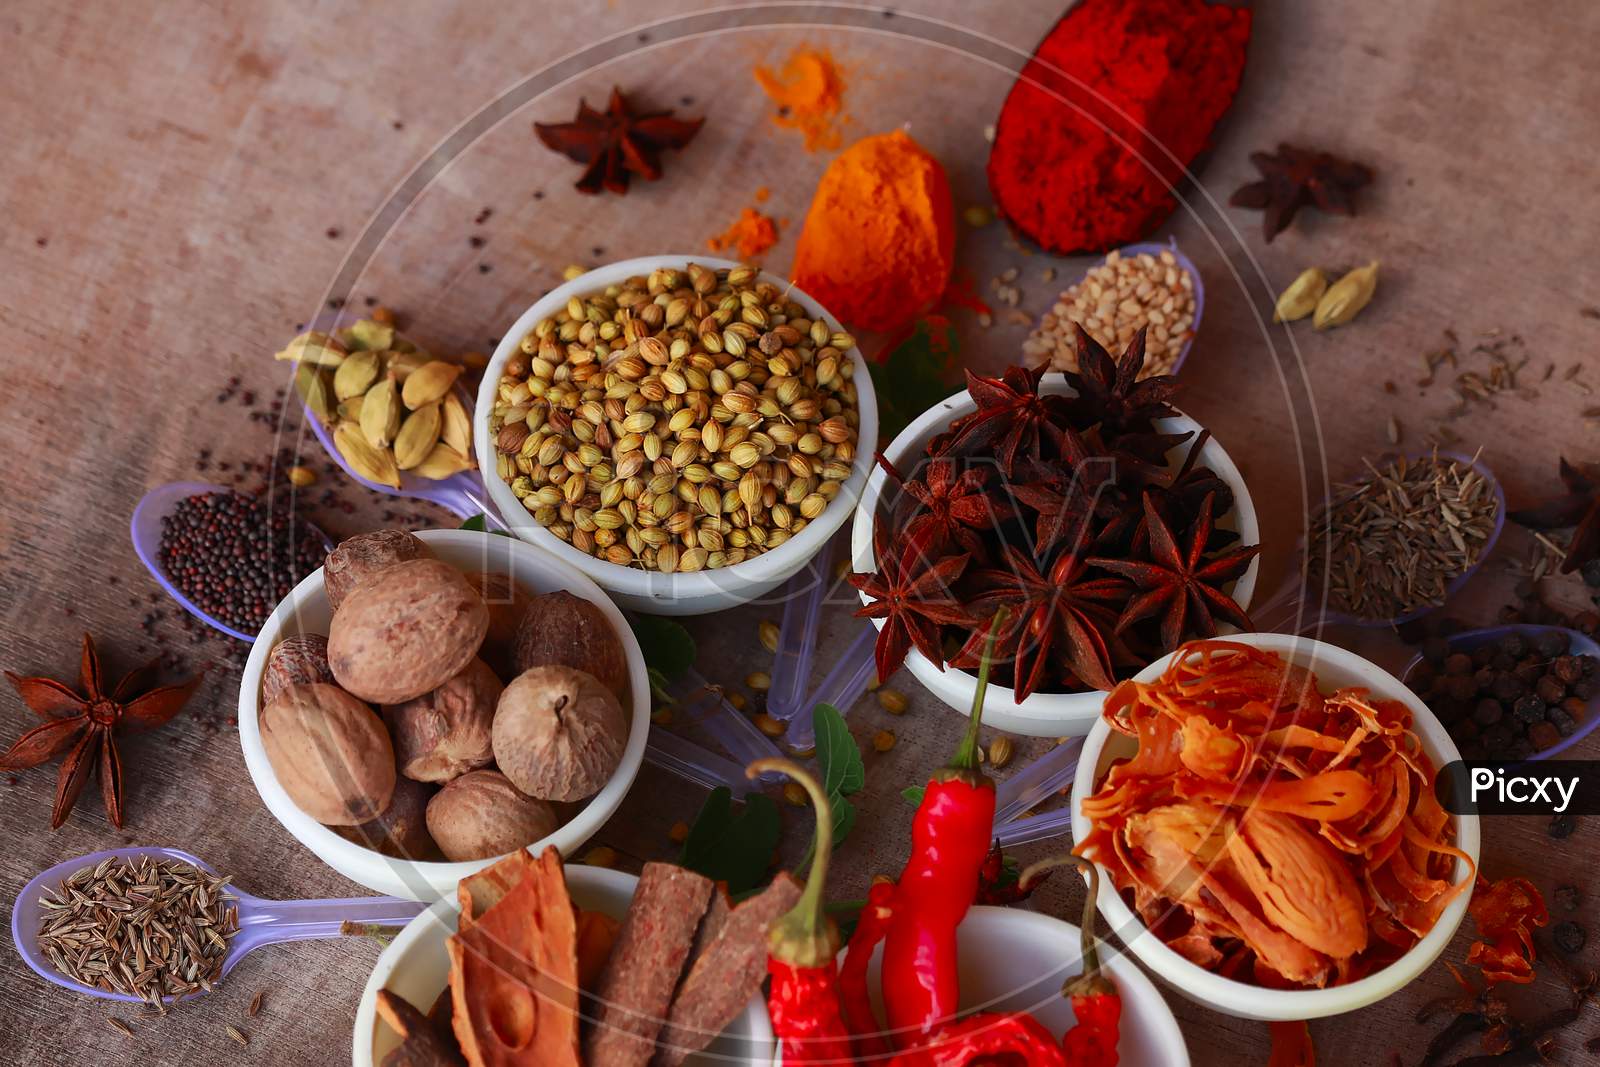 Colorful Herbs And Spices For Cooking,Indian Spices,Indian Spices On Wooden Table,Indian Cuisine. Top View Flat Lay,Indian Bay Leaf, Garam Masala, Mace, Javitri, Nutmeg, Jaiphal, Star Anise,